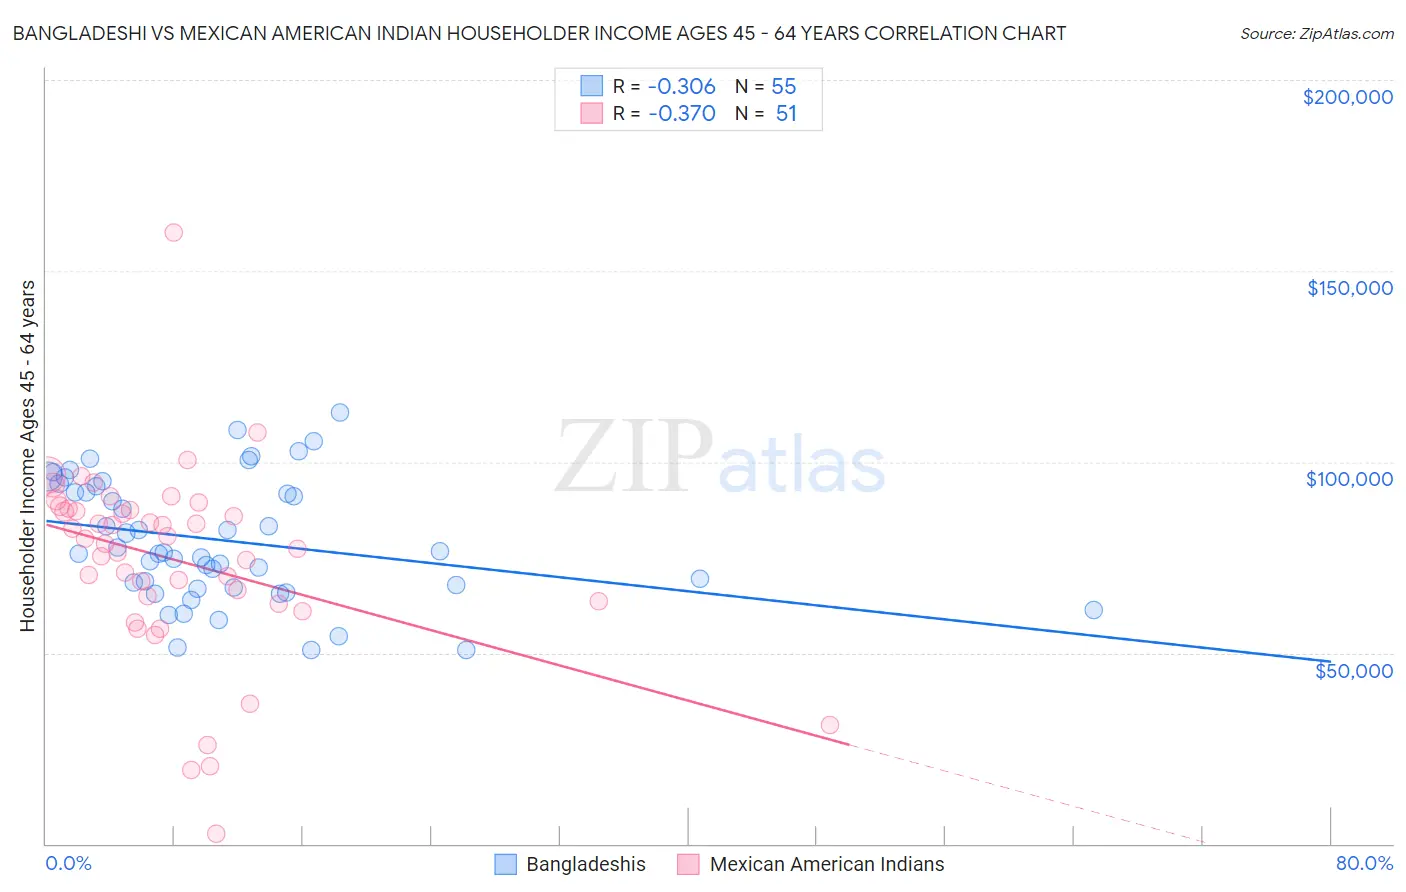 Bangladeshi vs Mexican American Indian Householder Income Ages 45 - 64 years